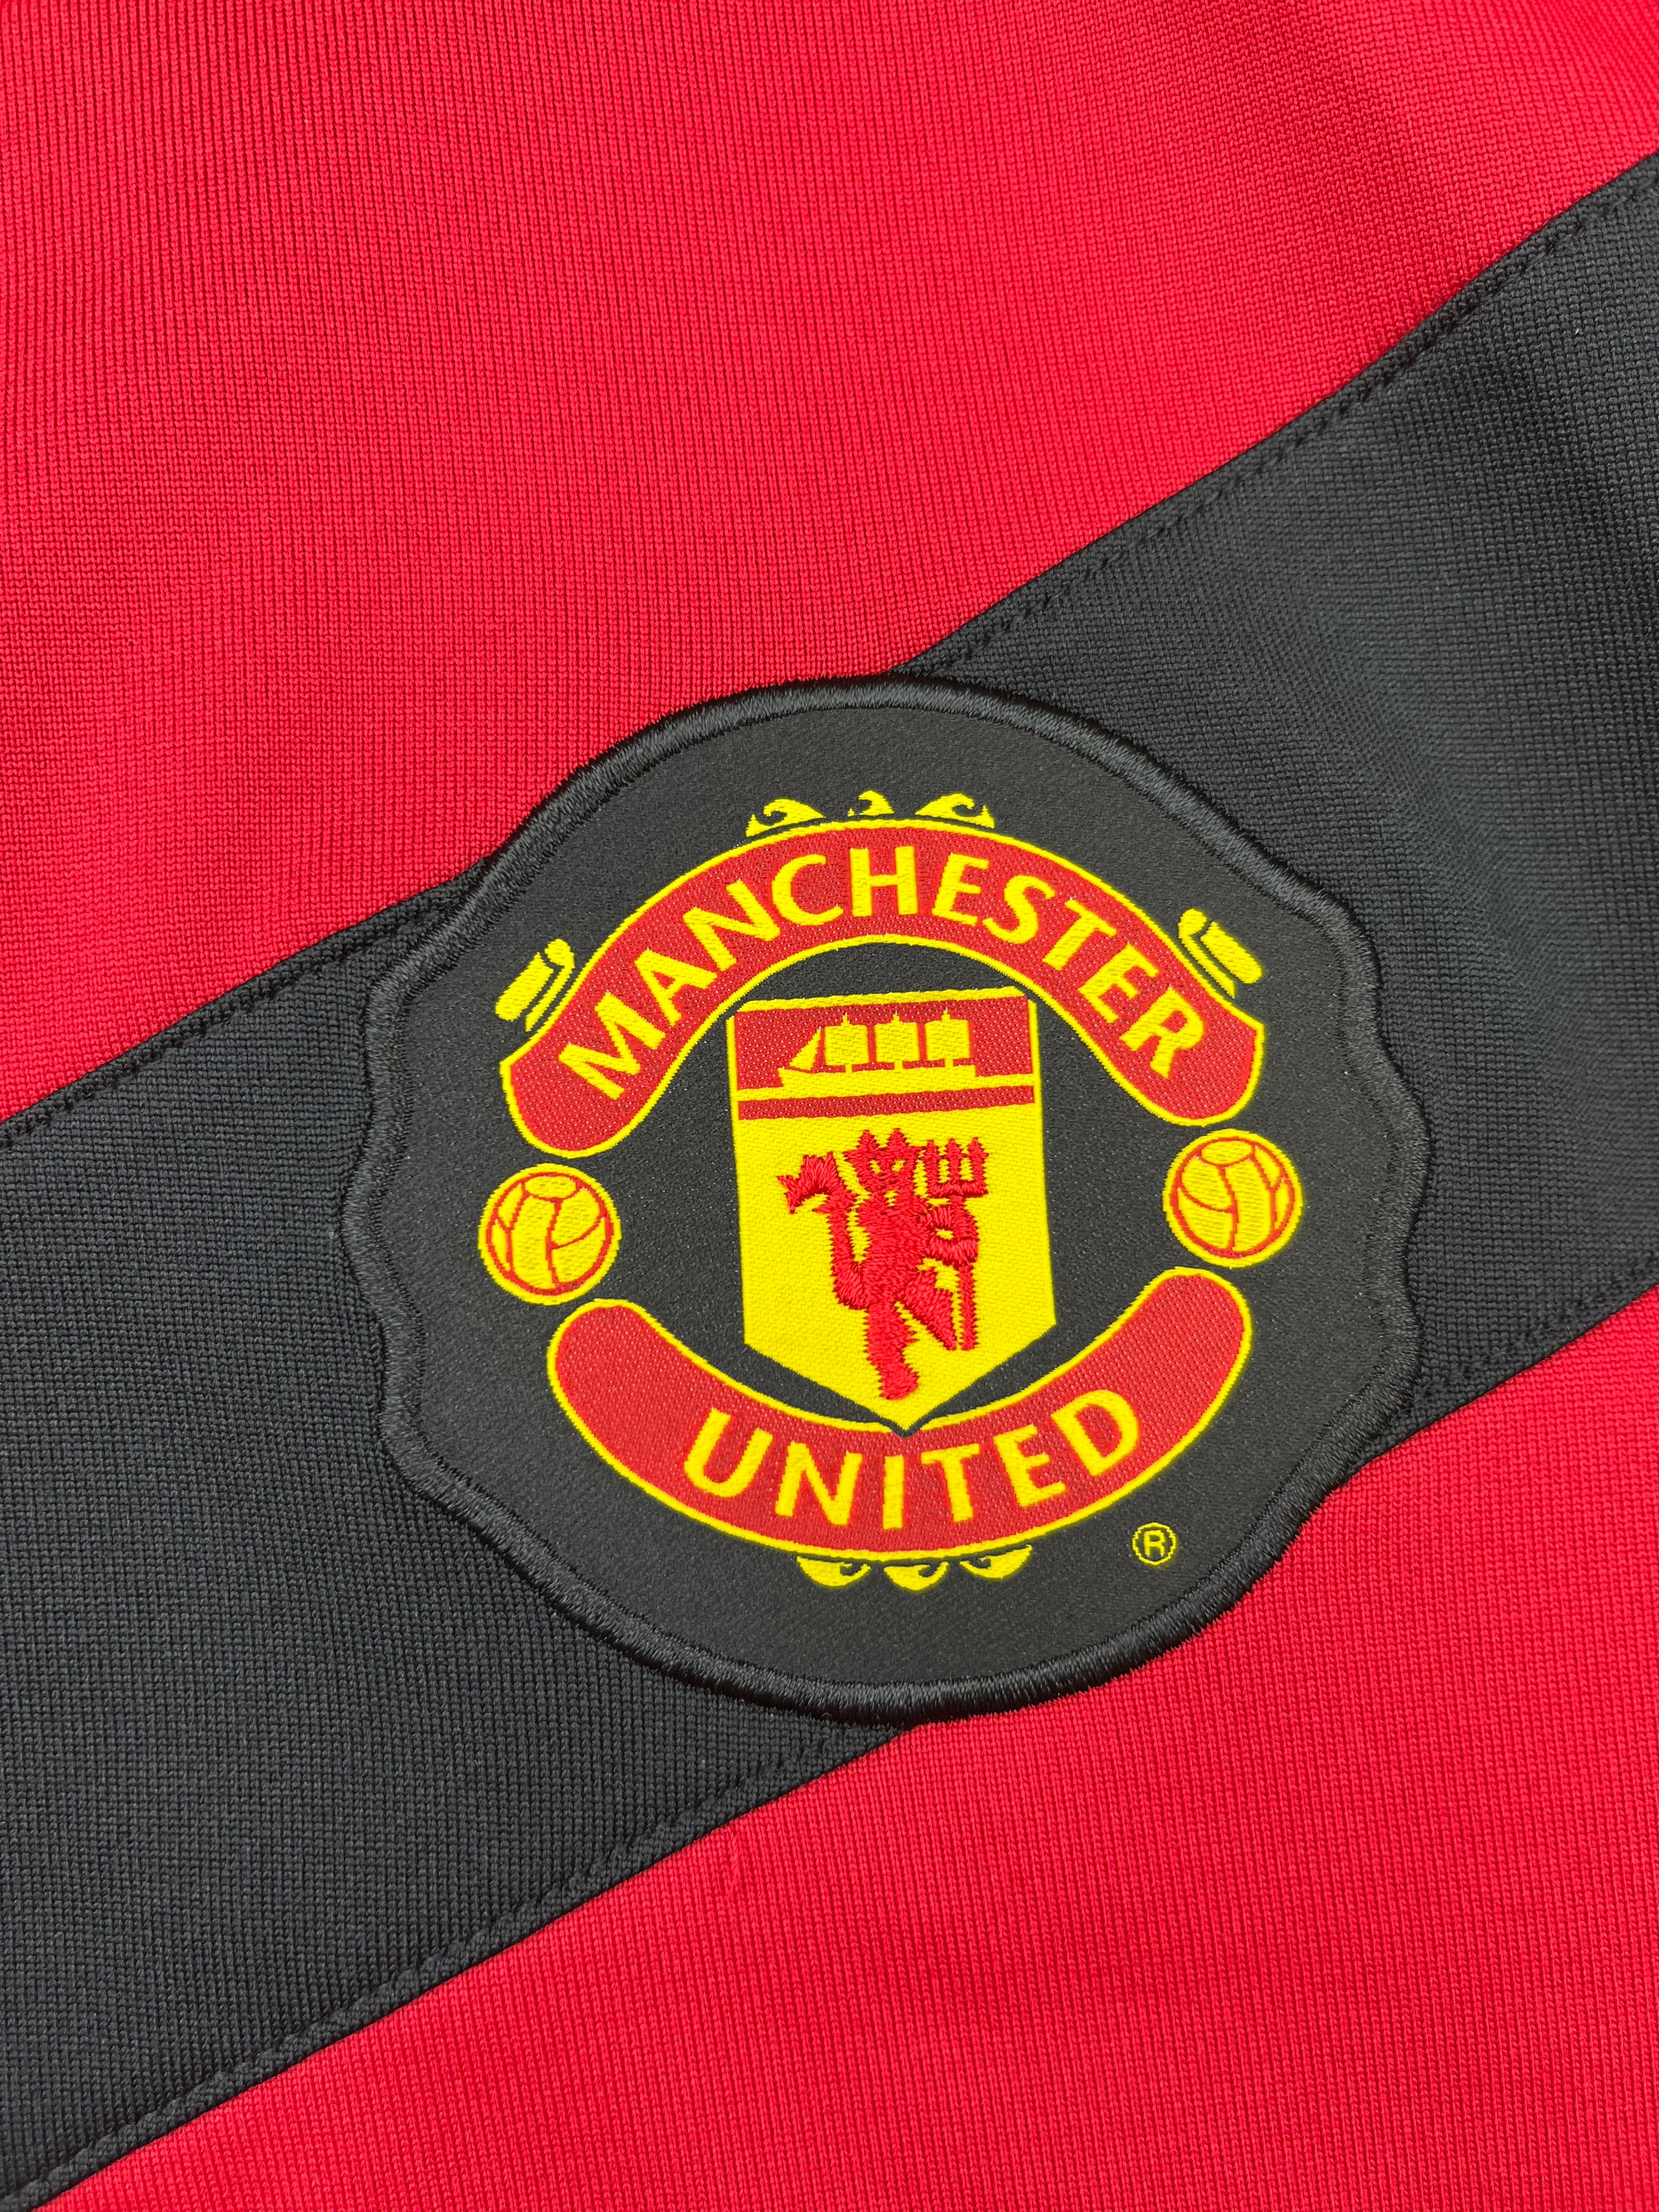 2009/10 Manchester United Home Shirt (M) 9.5/10